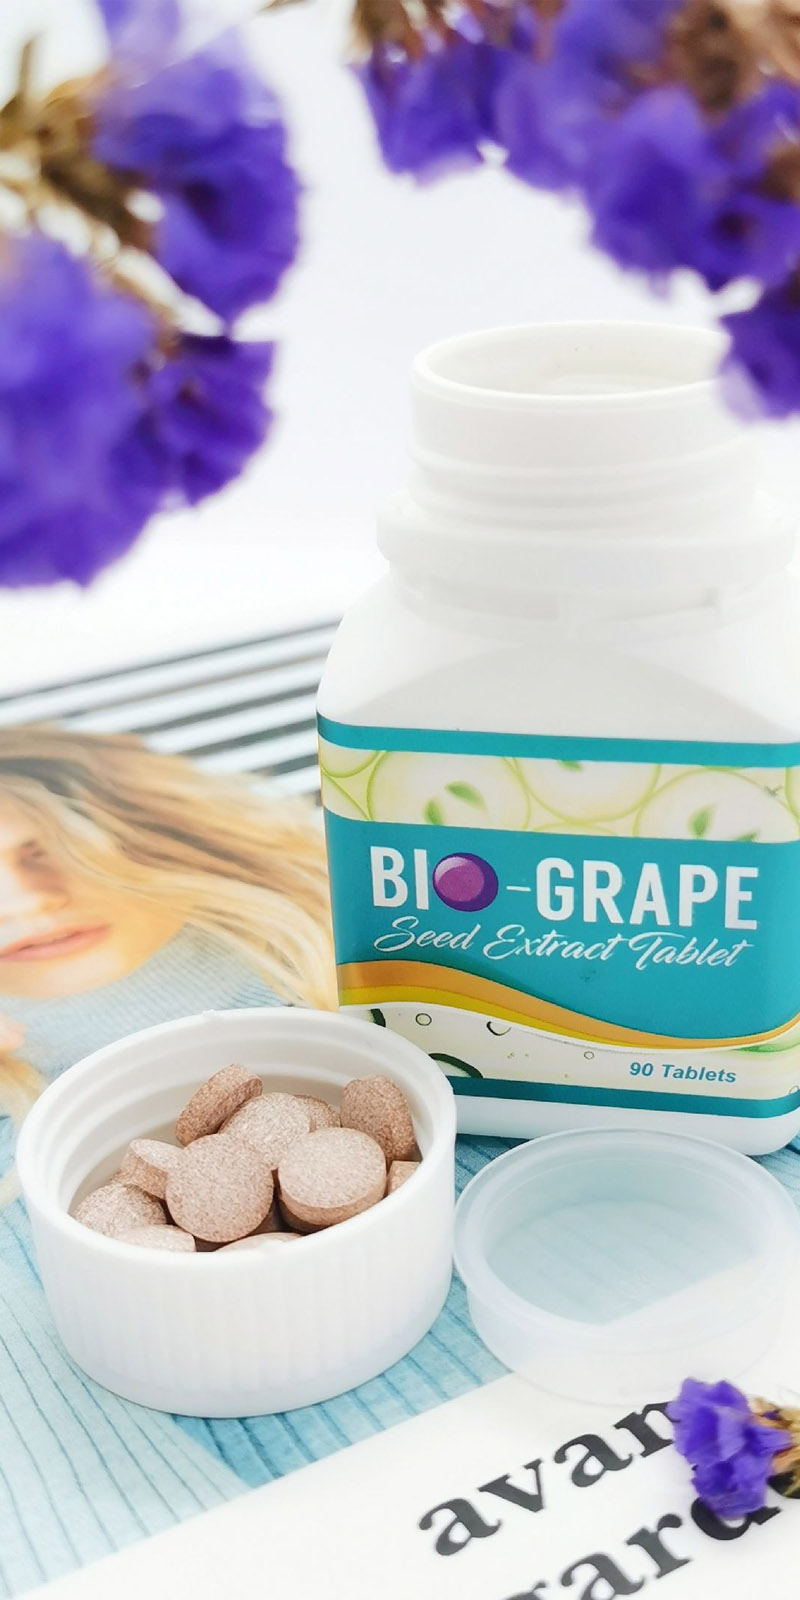 biograpeseed extract fight highblood pressure maintain blood sugar level